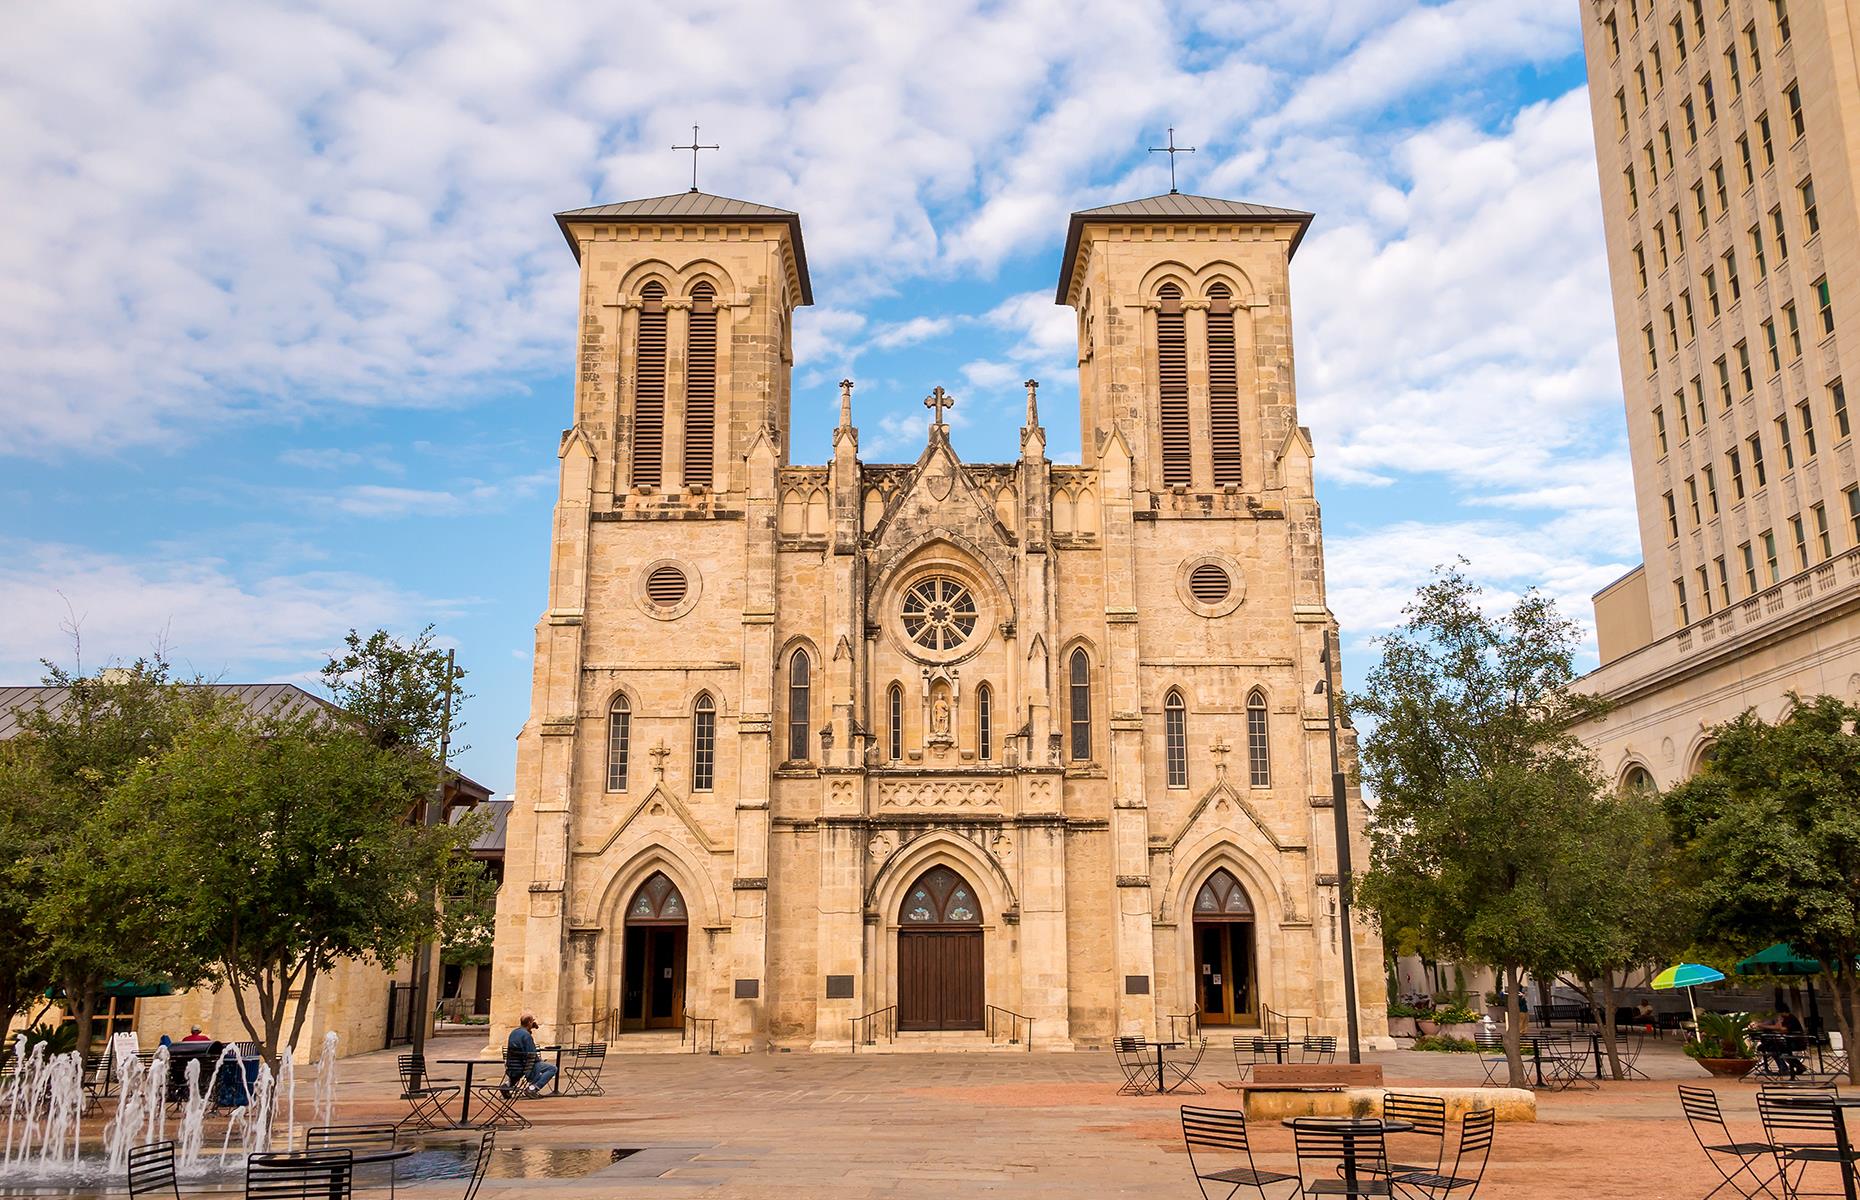 <p>Home to the oldest continuously functioning religious community in the state of Texas, <a href="https://sfcathedral.org/">San Fernando Cathedral</a> has been at the center of San Antonio's religious life since its inception in 1731. Occupying a unique position in the state's history, the cathedral today welcomes more than 5,000 participants at weekend Masses every week. It's also famous for <a href="https://www.visitsanantonio.com/san-antonio-the-saga/">San Antonio | The Saga</a> – a light show depicting the history of San Antonio projected onto the façade of the cathedral every Tuesday, Friday, Saturday and Sunday.</p>